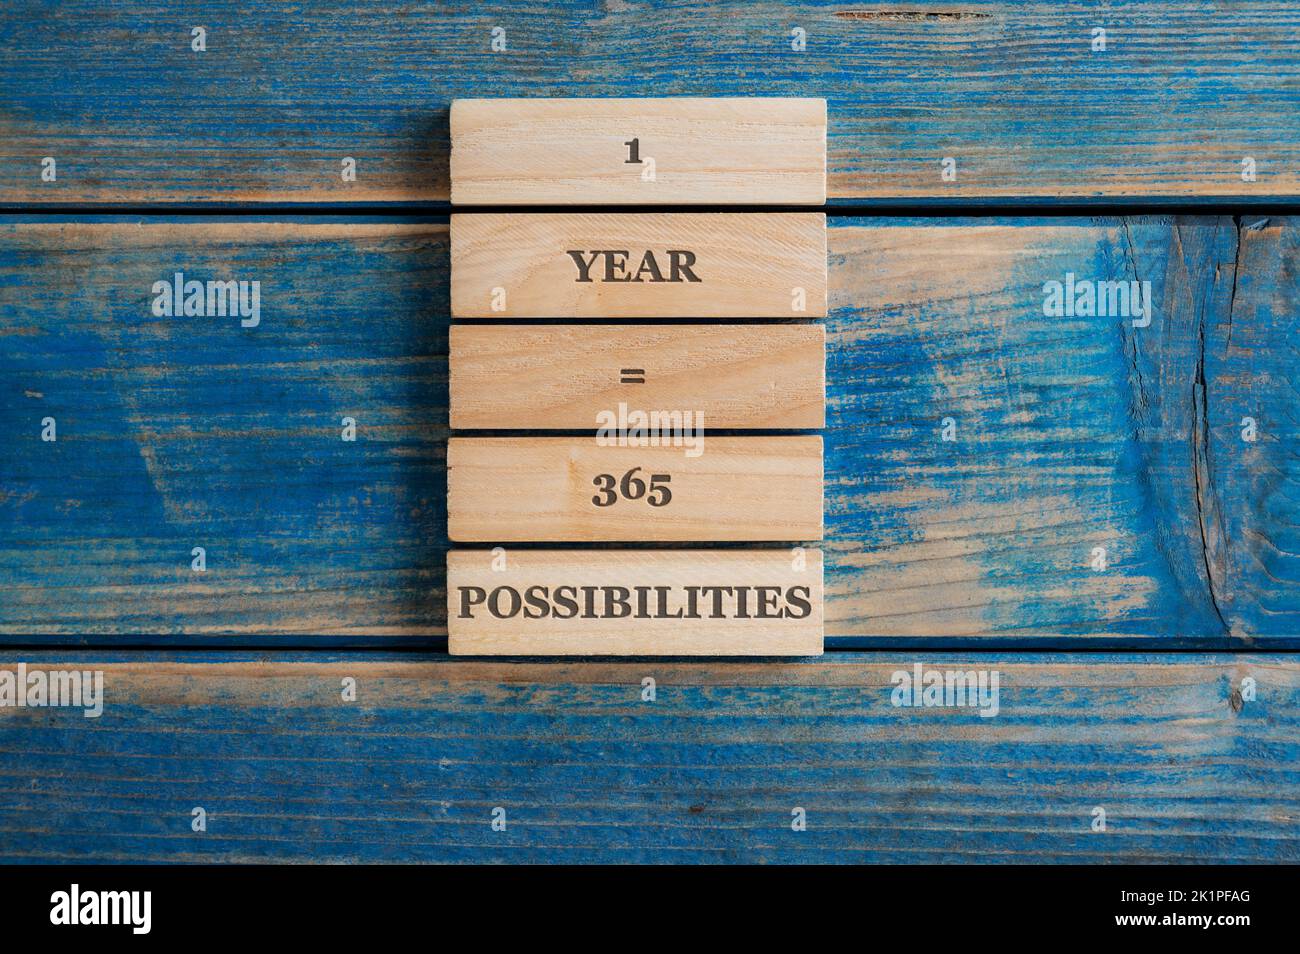 One year is 365 possibilities sign written on a stack of wooden pegs placed over blue wooden background. Stock Photo